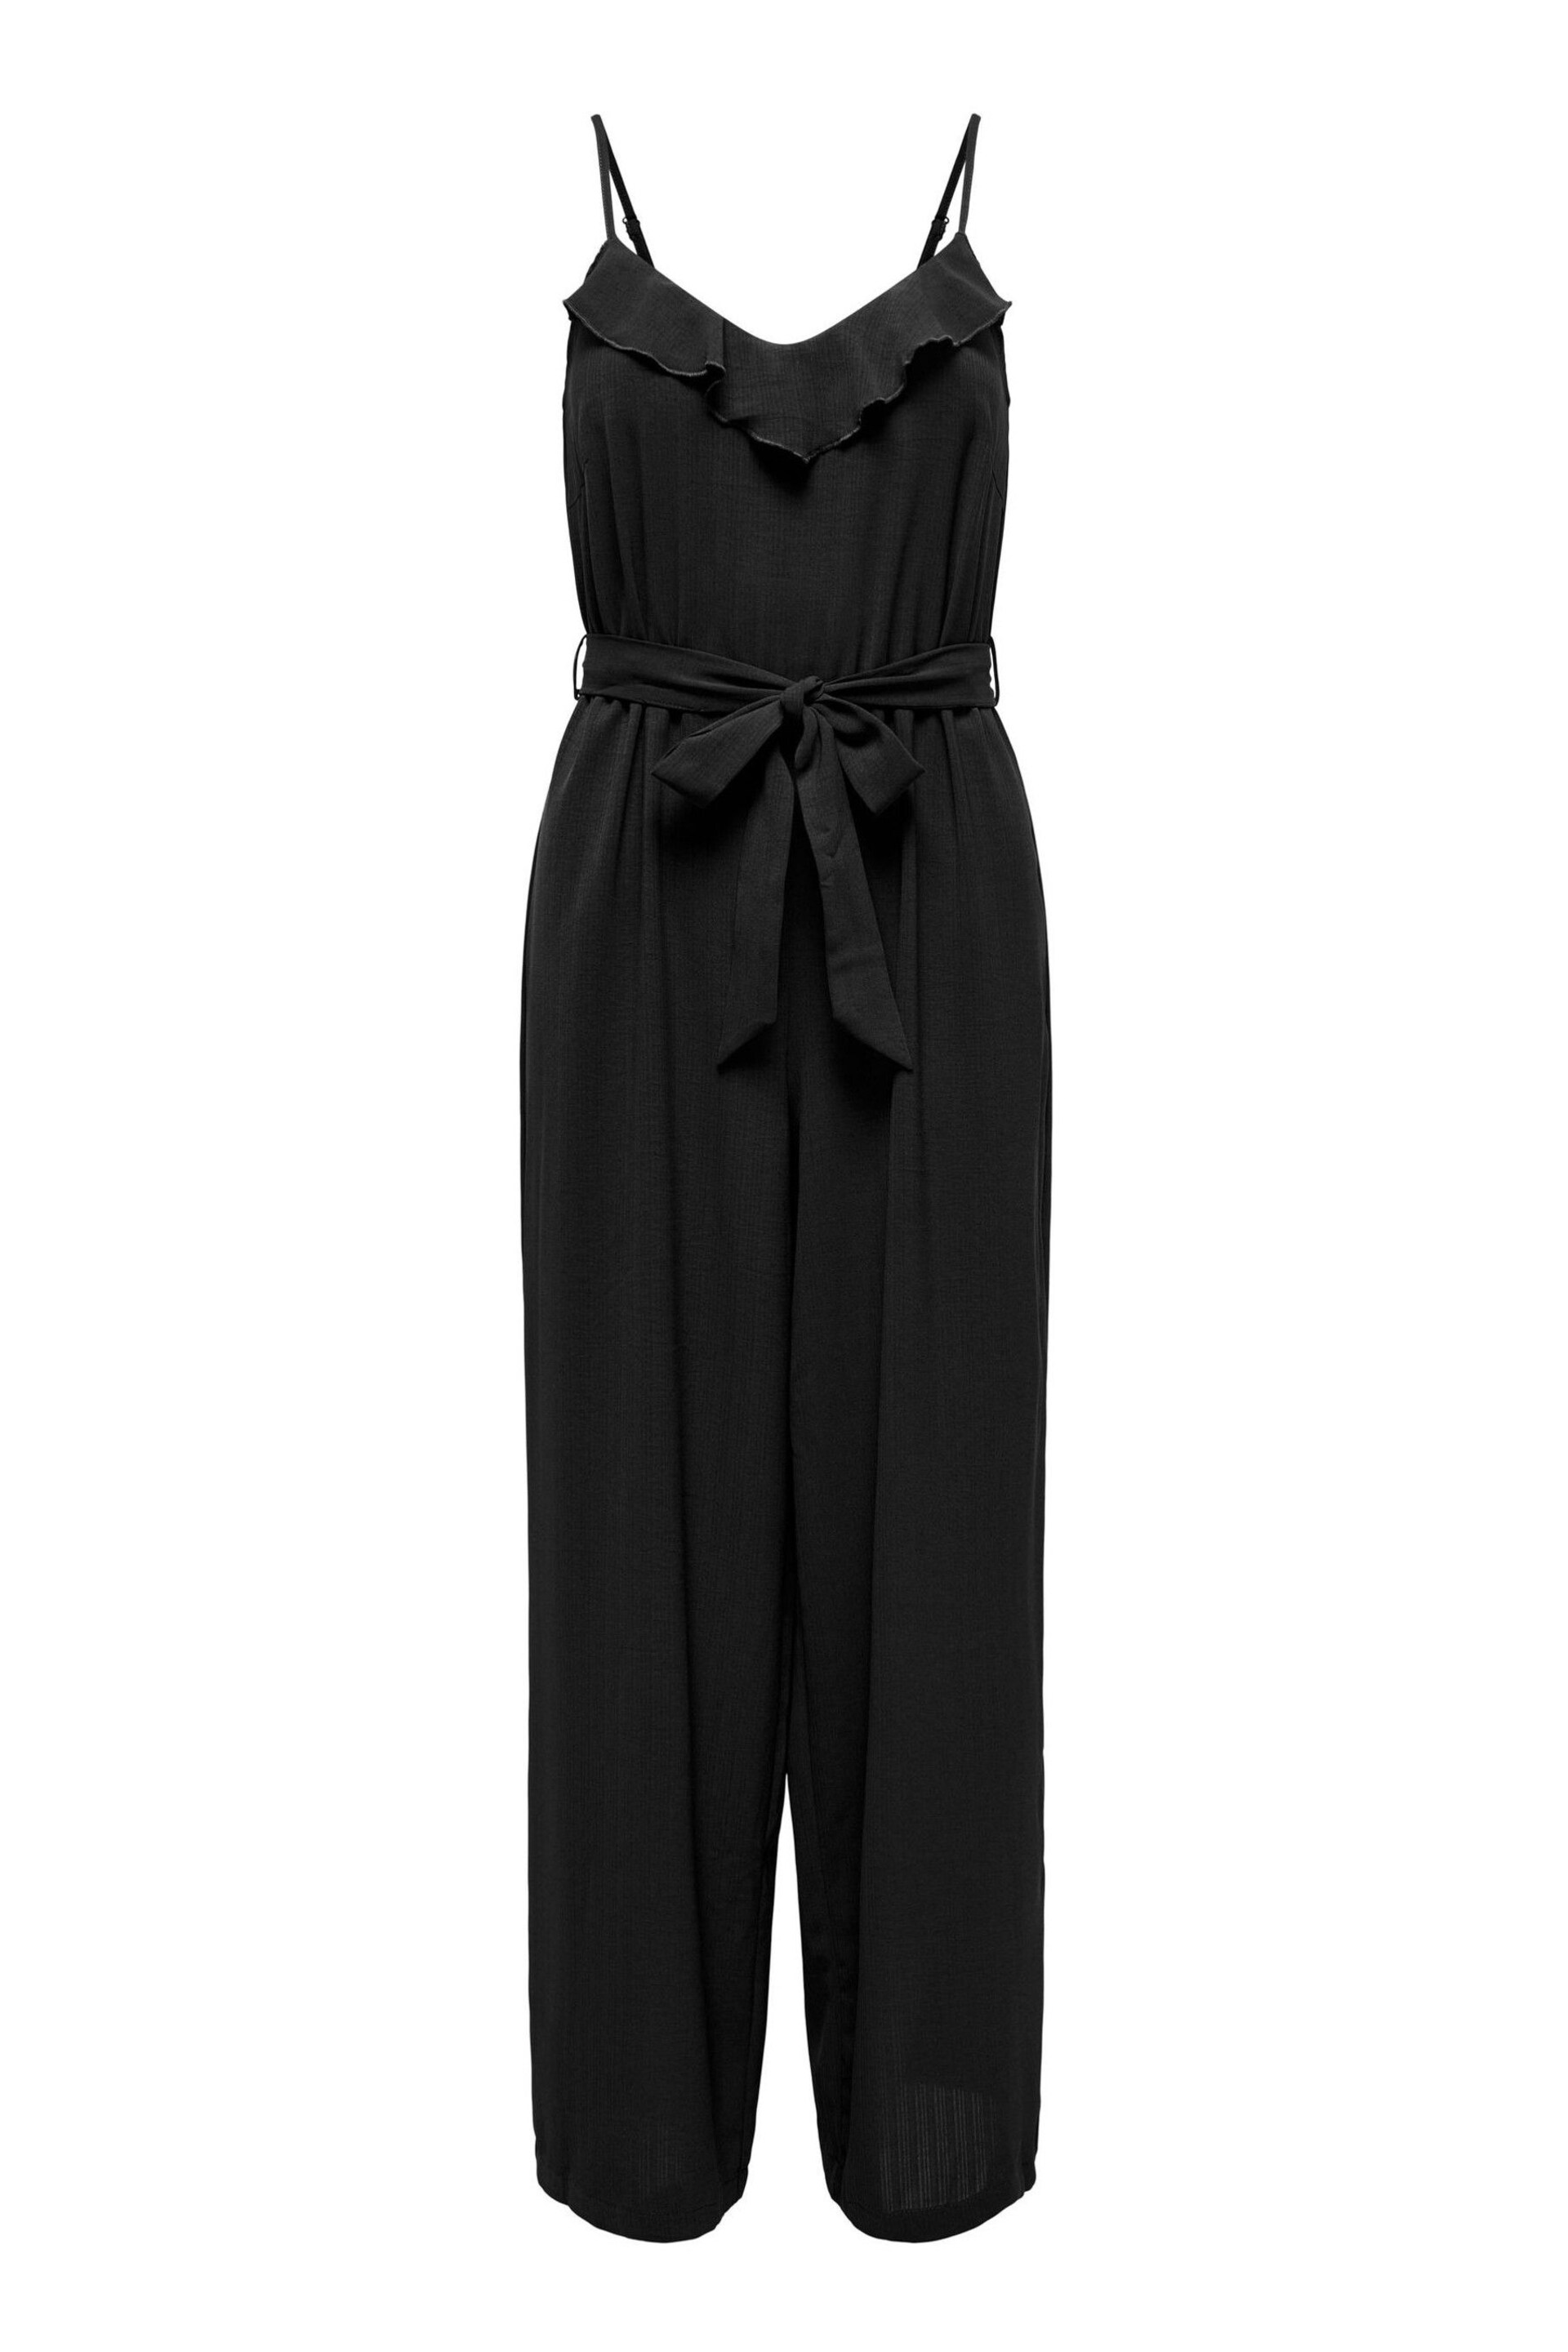 ONLY Black Ruffle Cami Tie Front Jumpsuit - Image 5 of 6